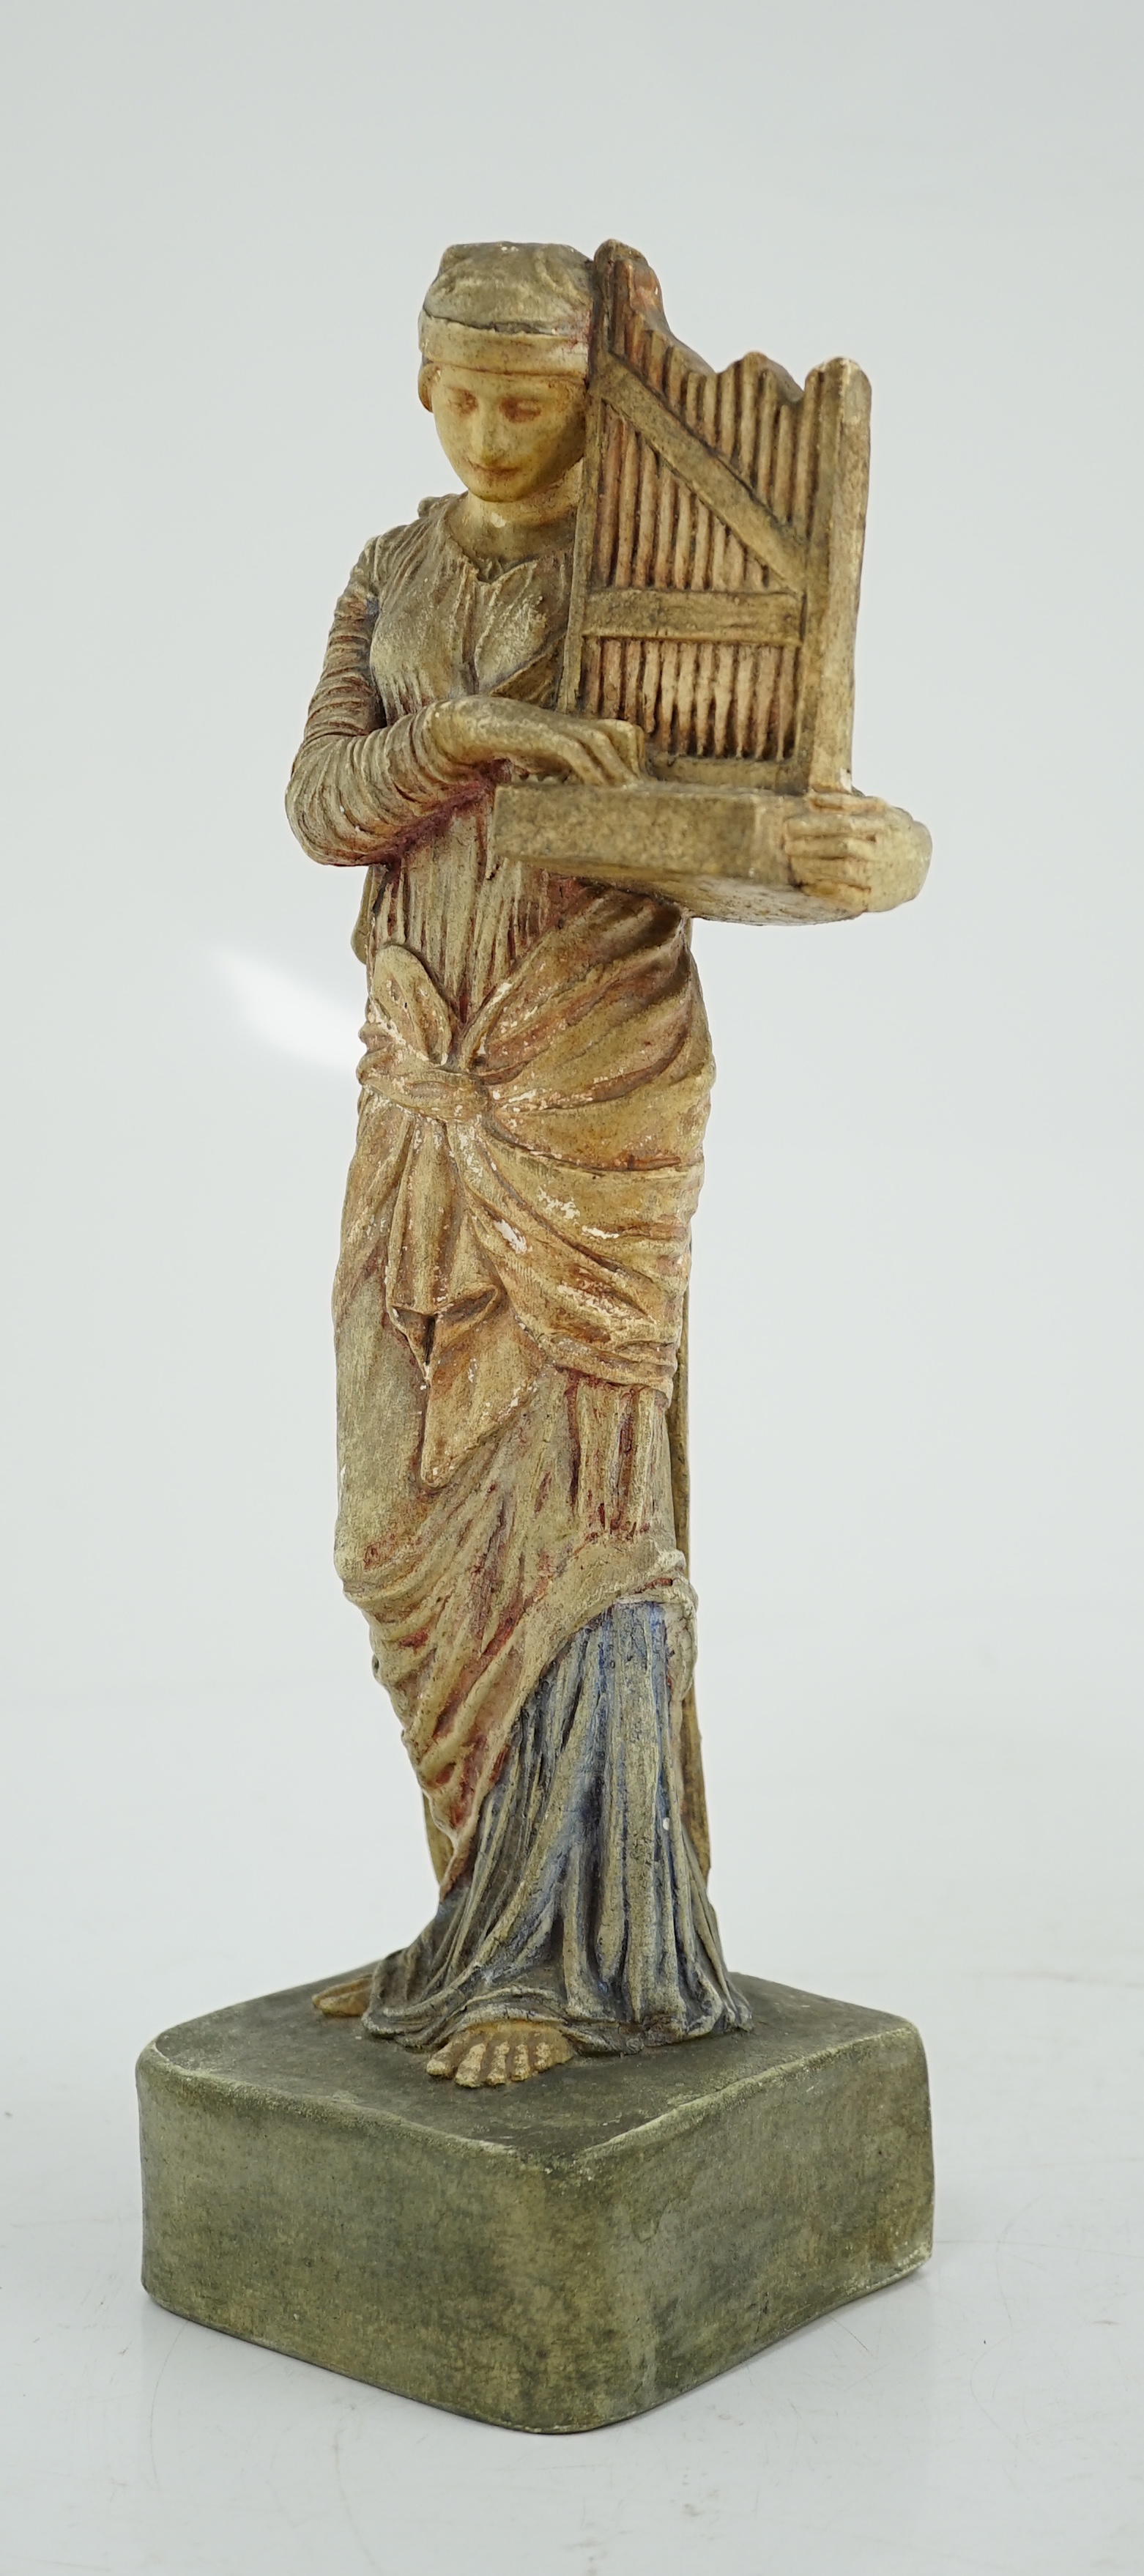 A Compton tempera painted pottery figure of St Cecilia, early 20th century, losses to paint